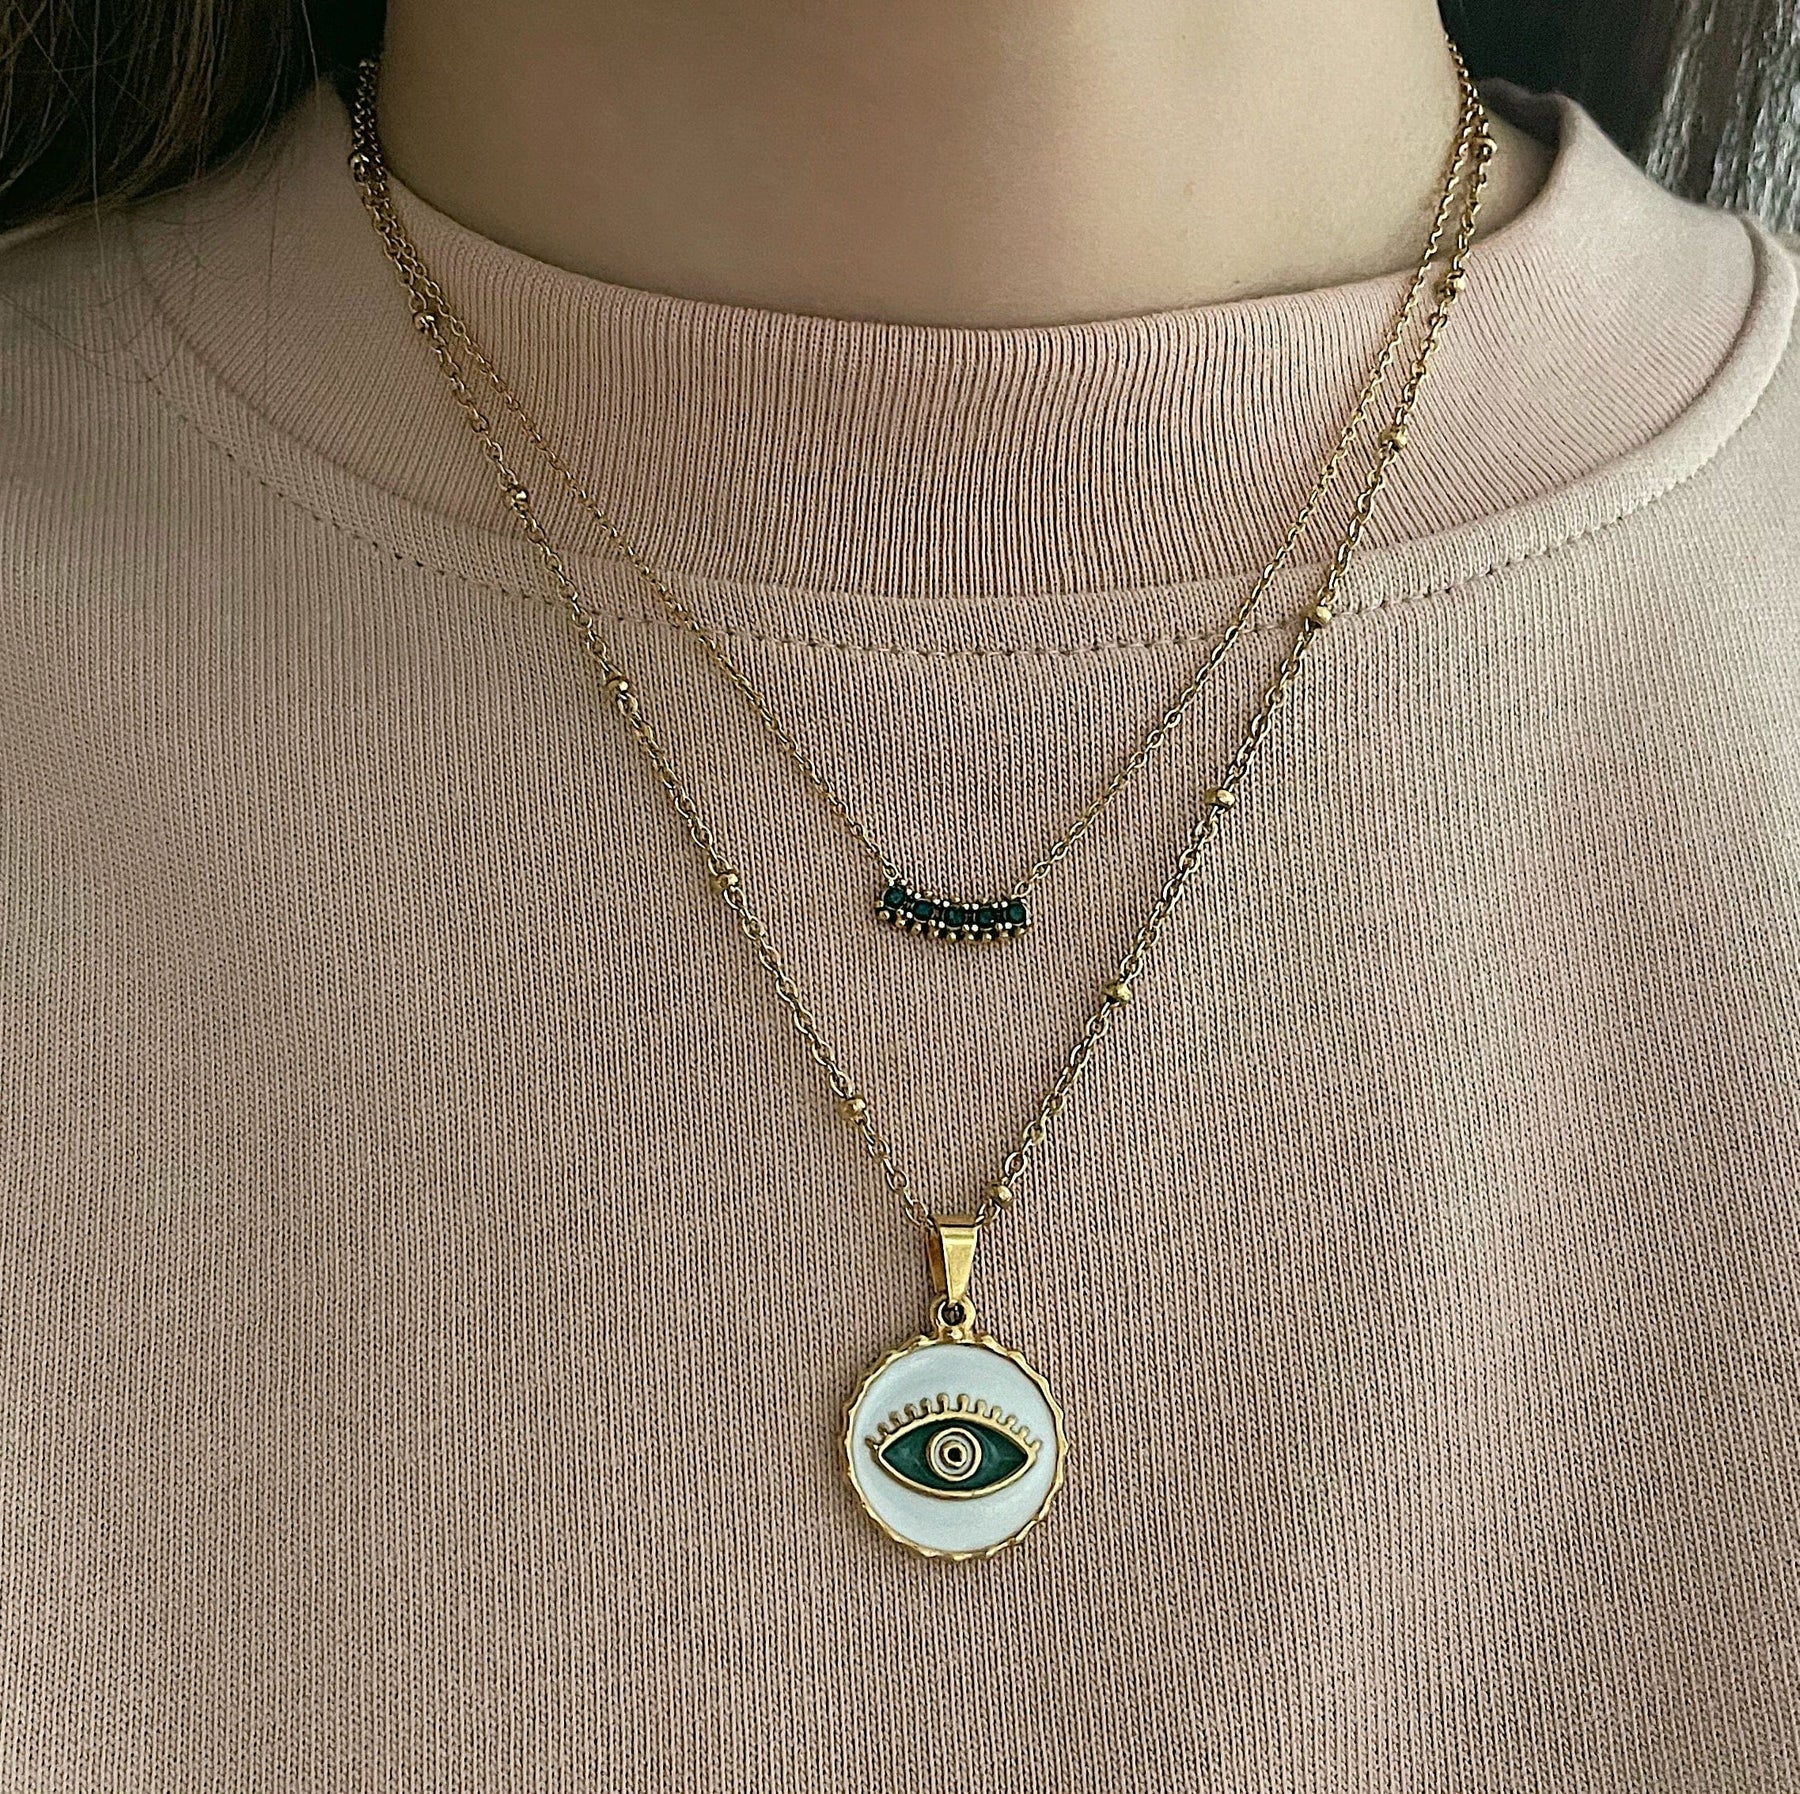 BohoMoon Stainless Steel Mystic Eye Necklace Gold